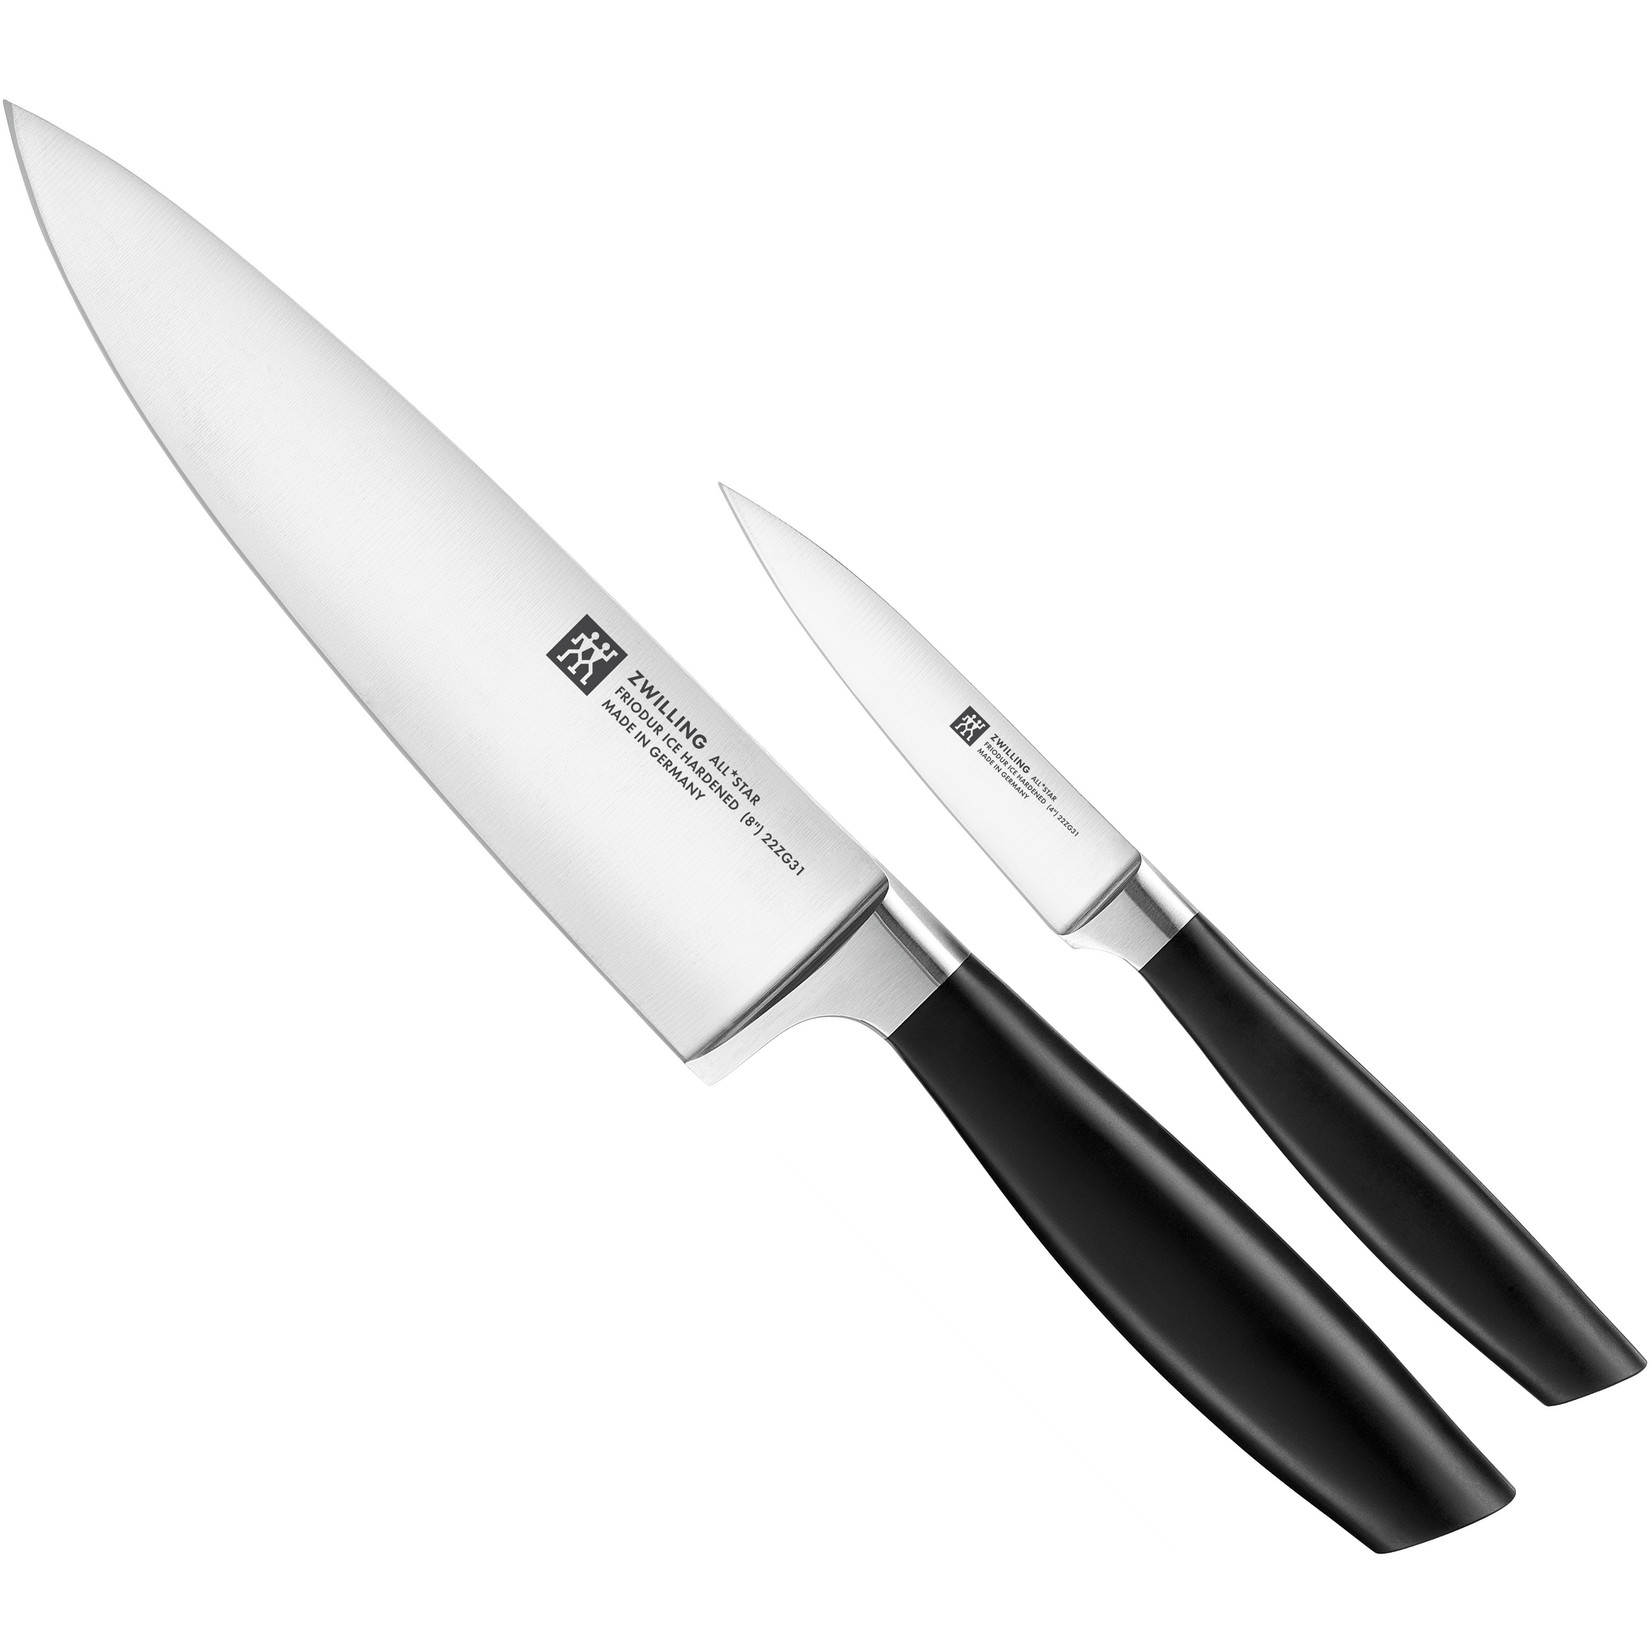 Zwilling Zwilling All Star messenset 2-delig